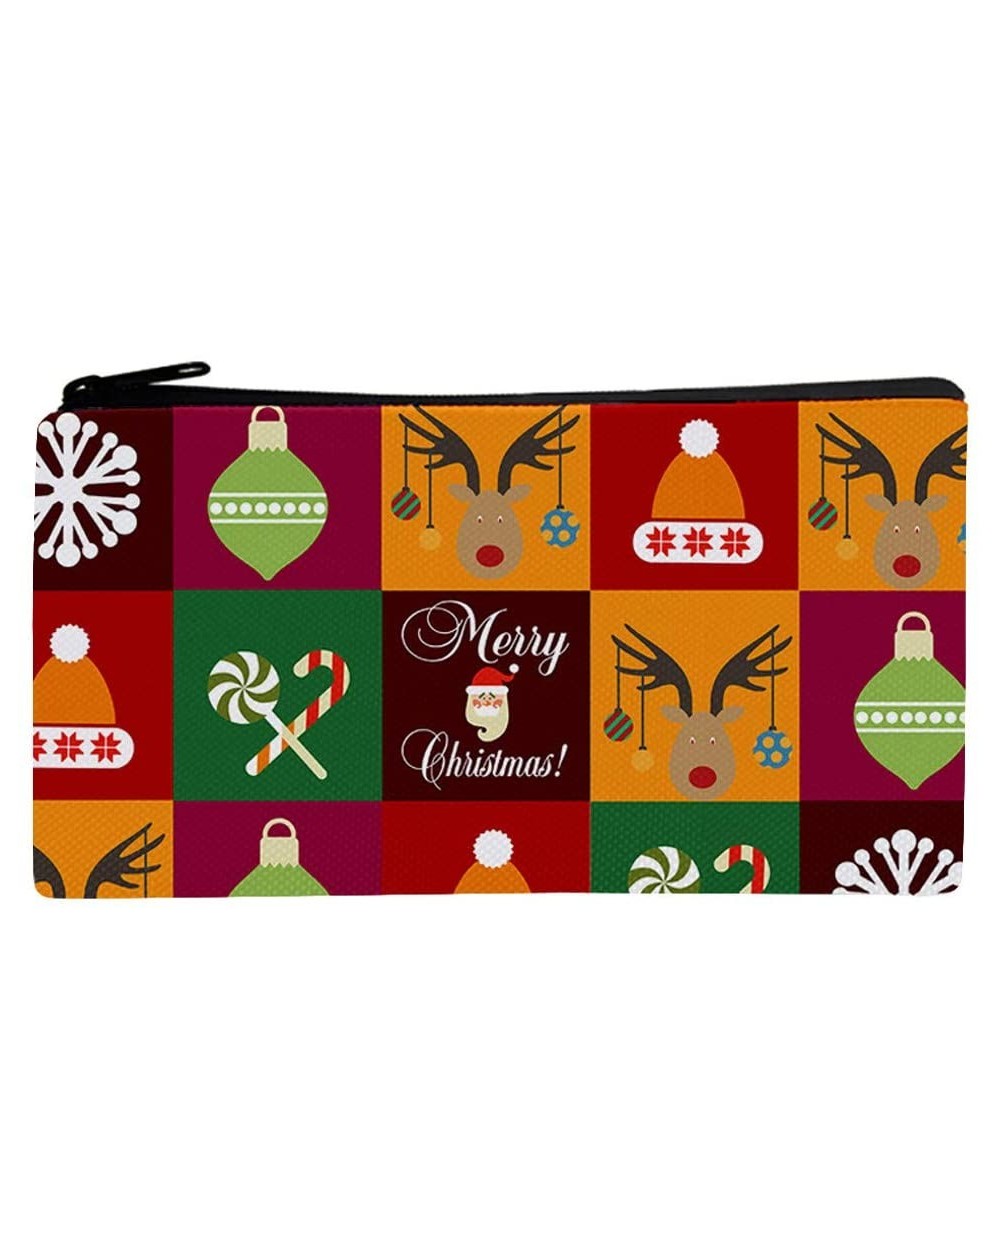 Swags Christmas Students Fashion Leisure Pencil Case Storage Makeup Bags Coin Purse- Christmas Ornaments Advent Calendar Pill...